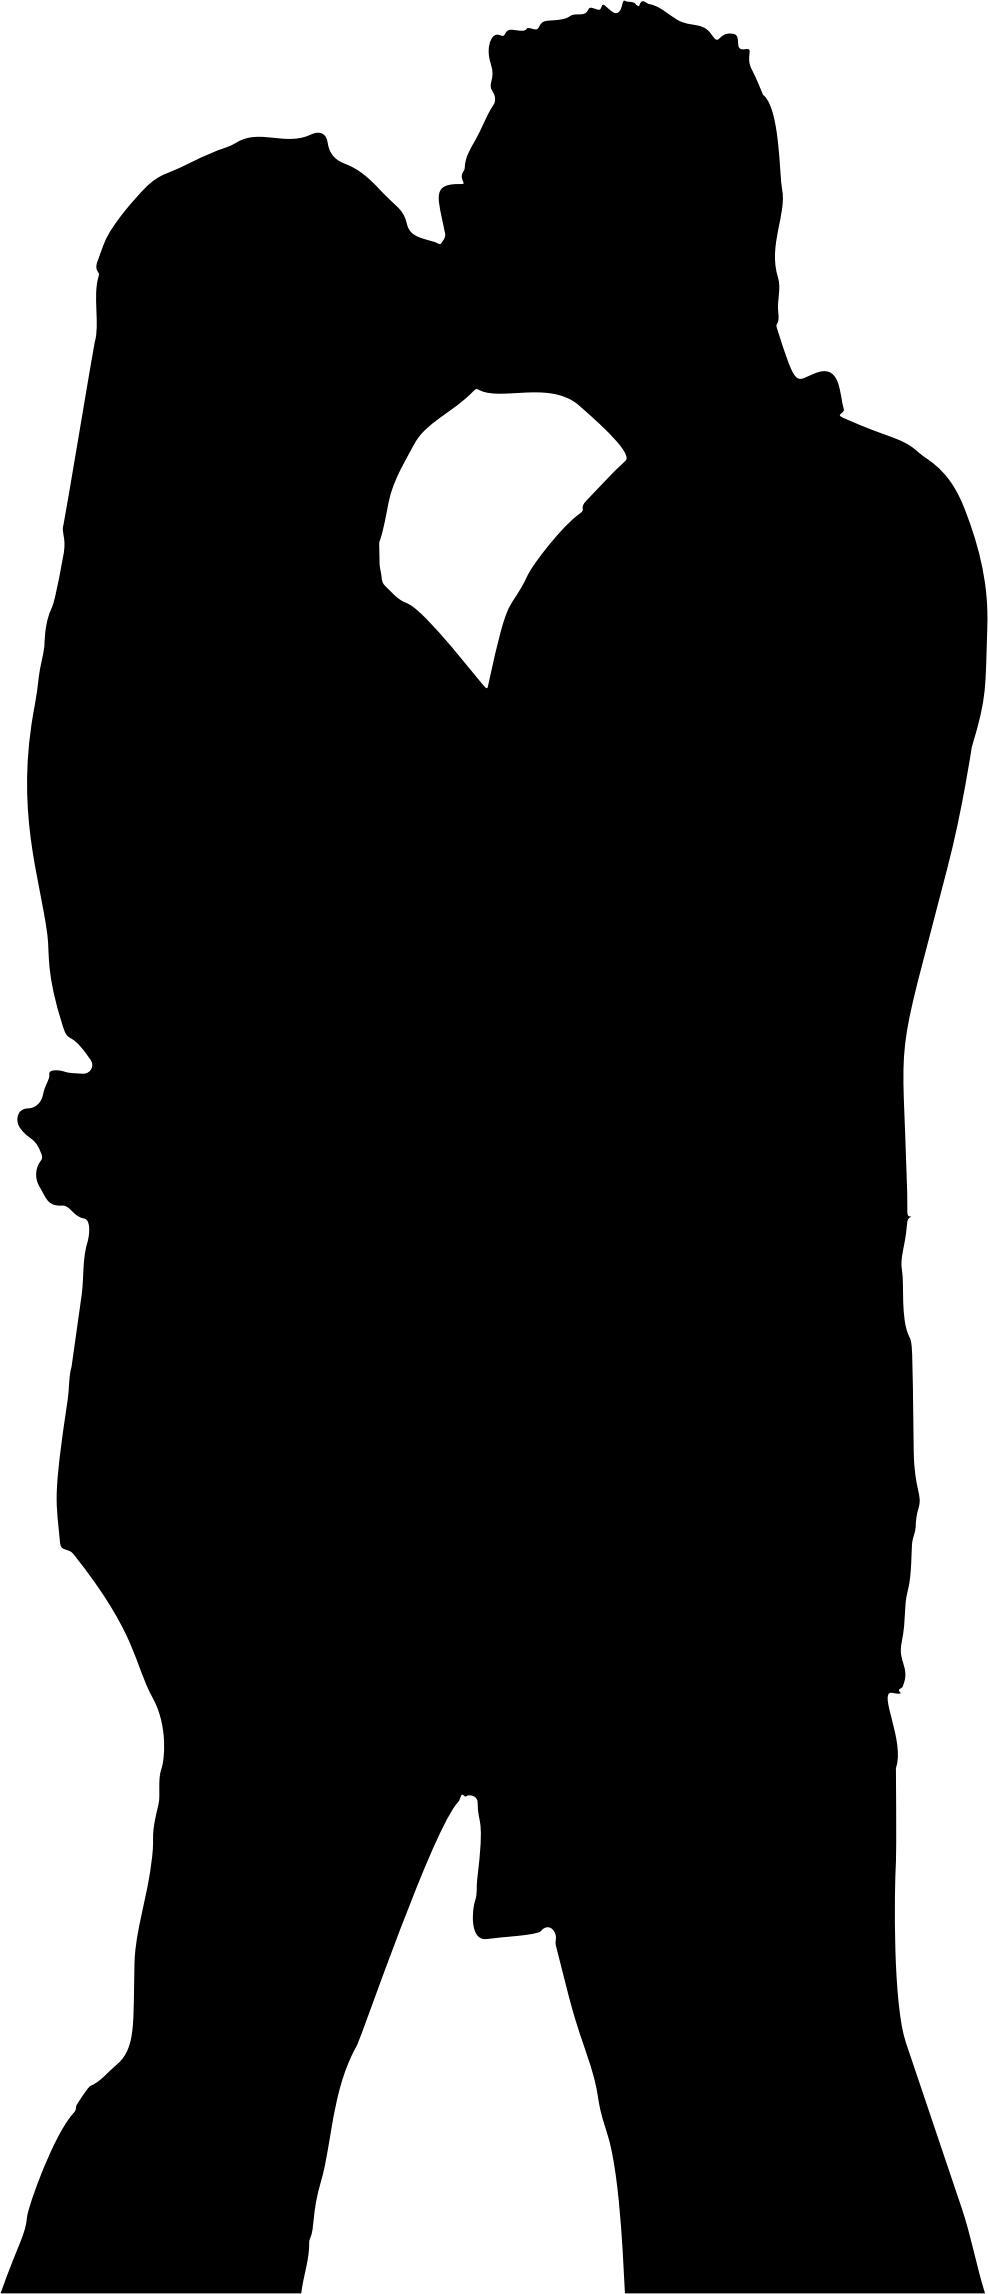 Couple Hugging And Kissing Silhouette png transparent